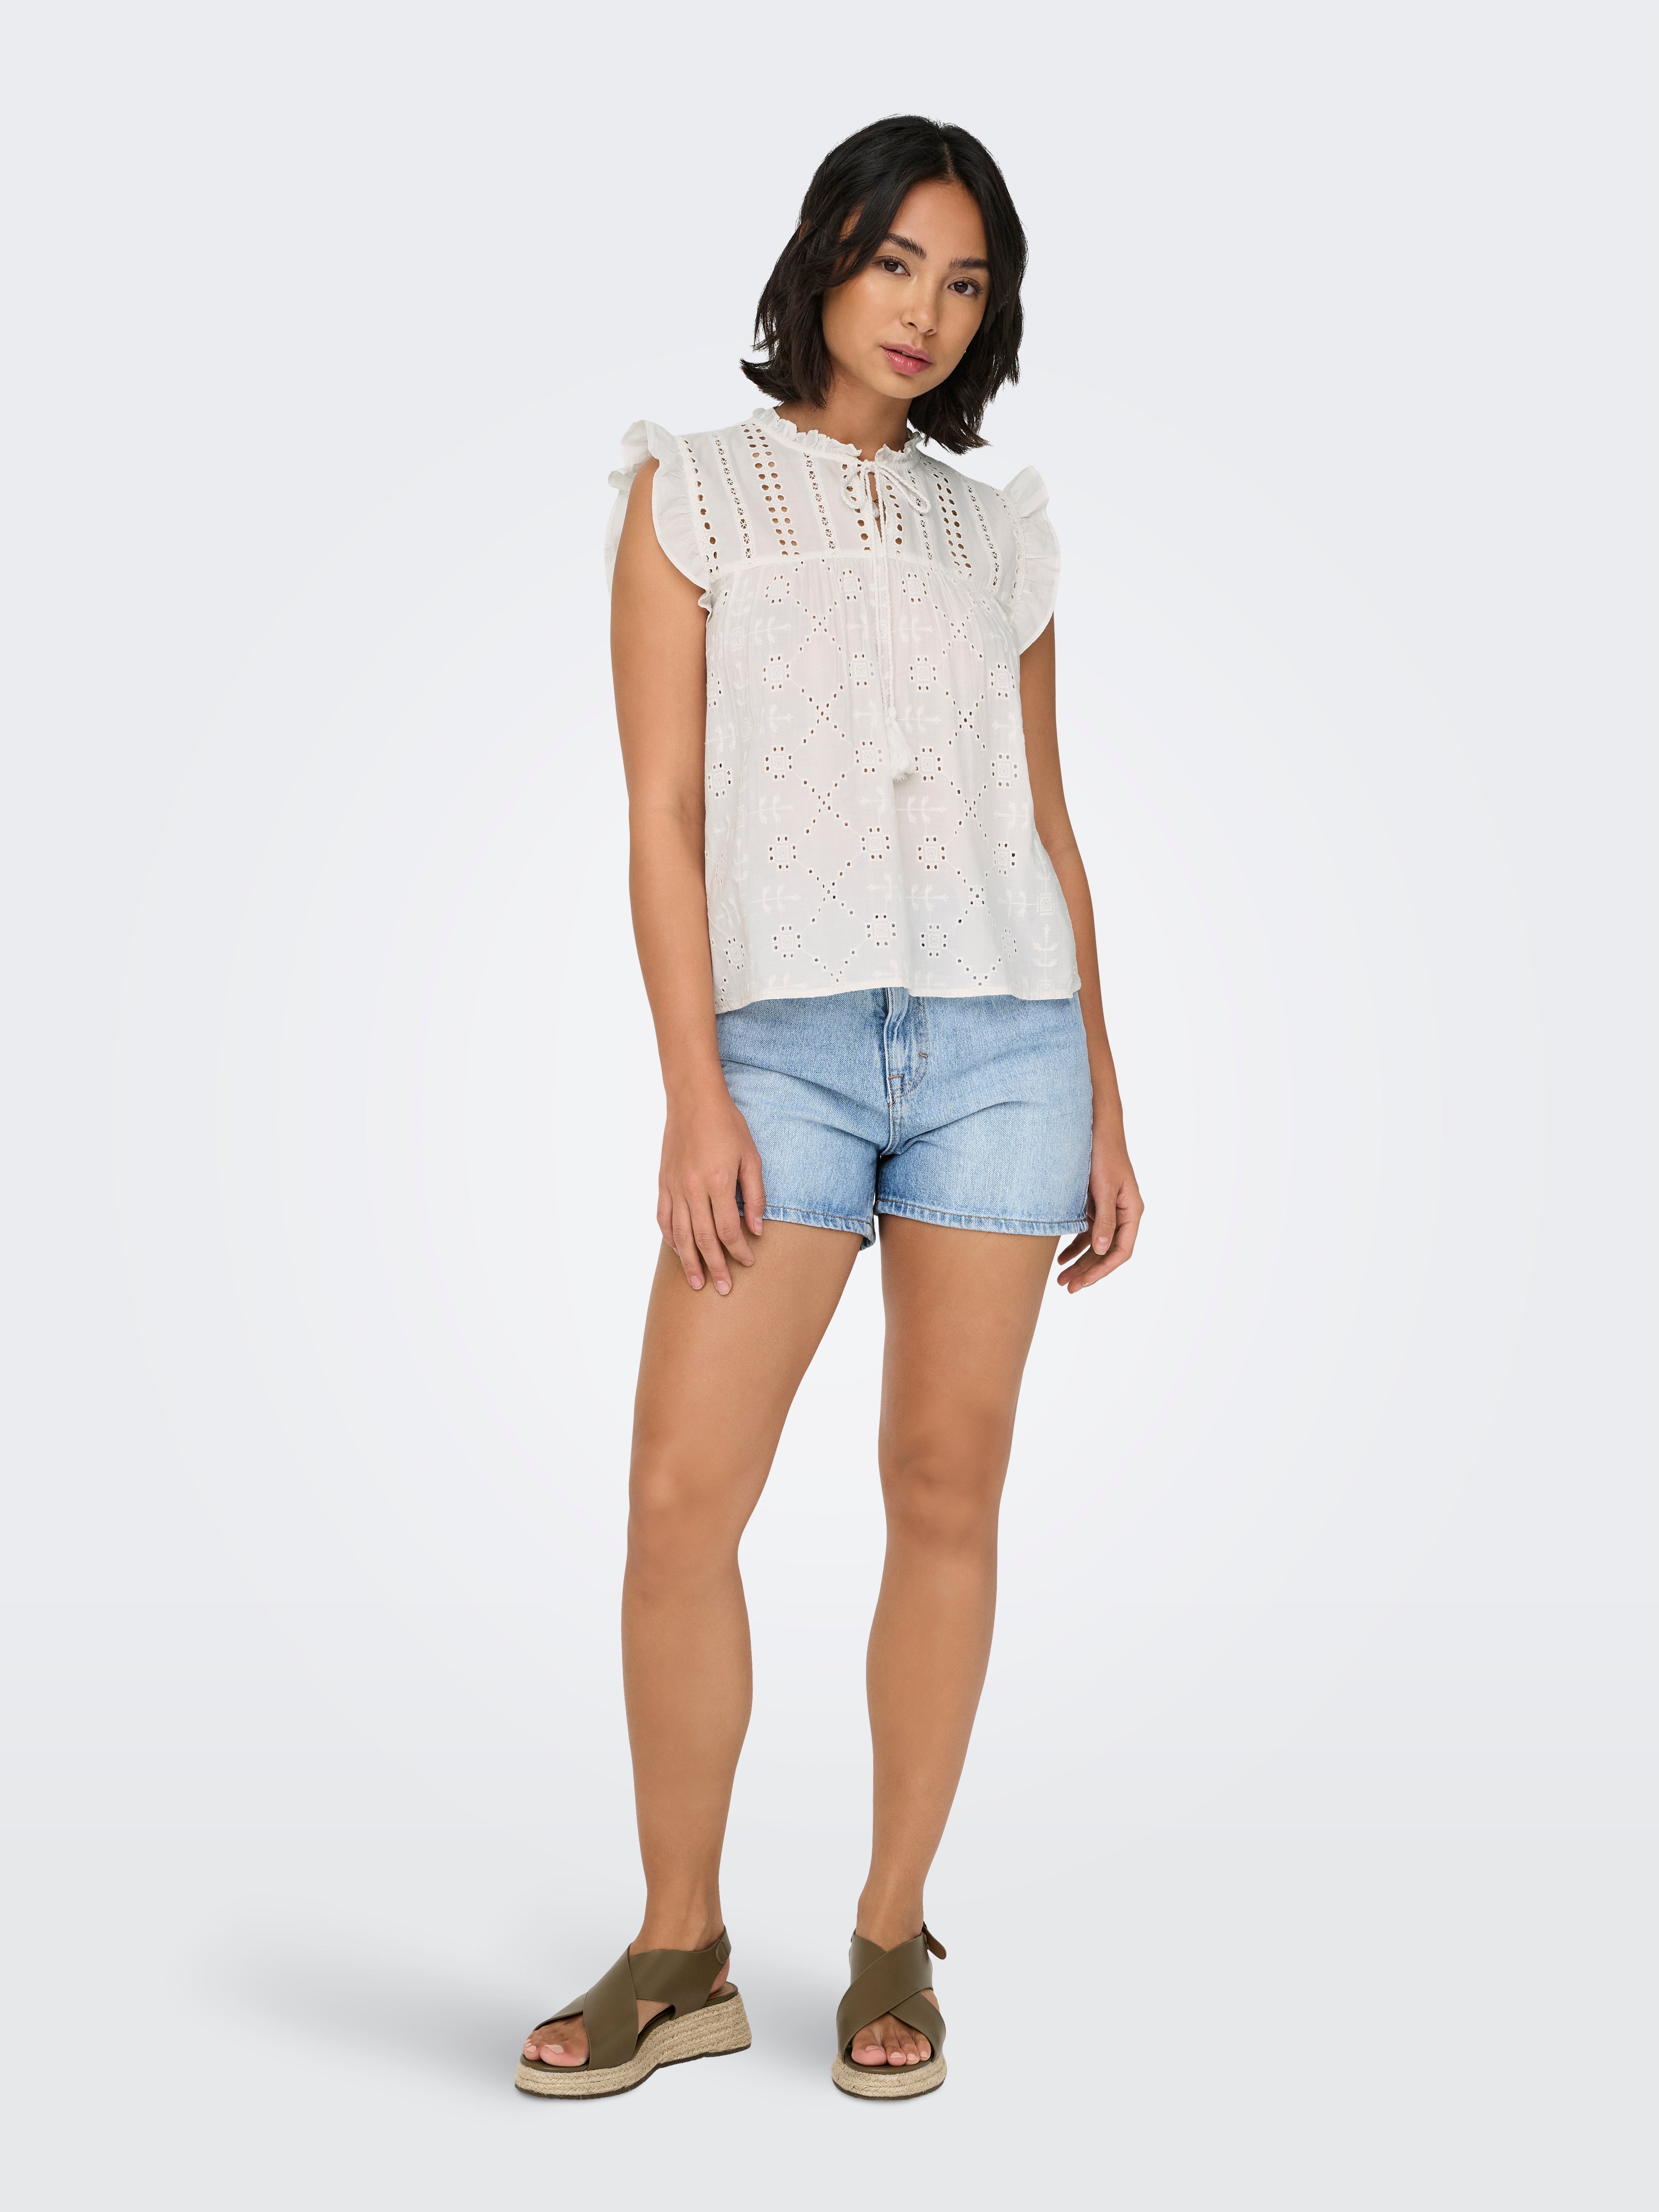 O-neck lace top